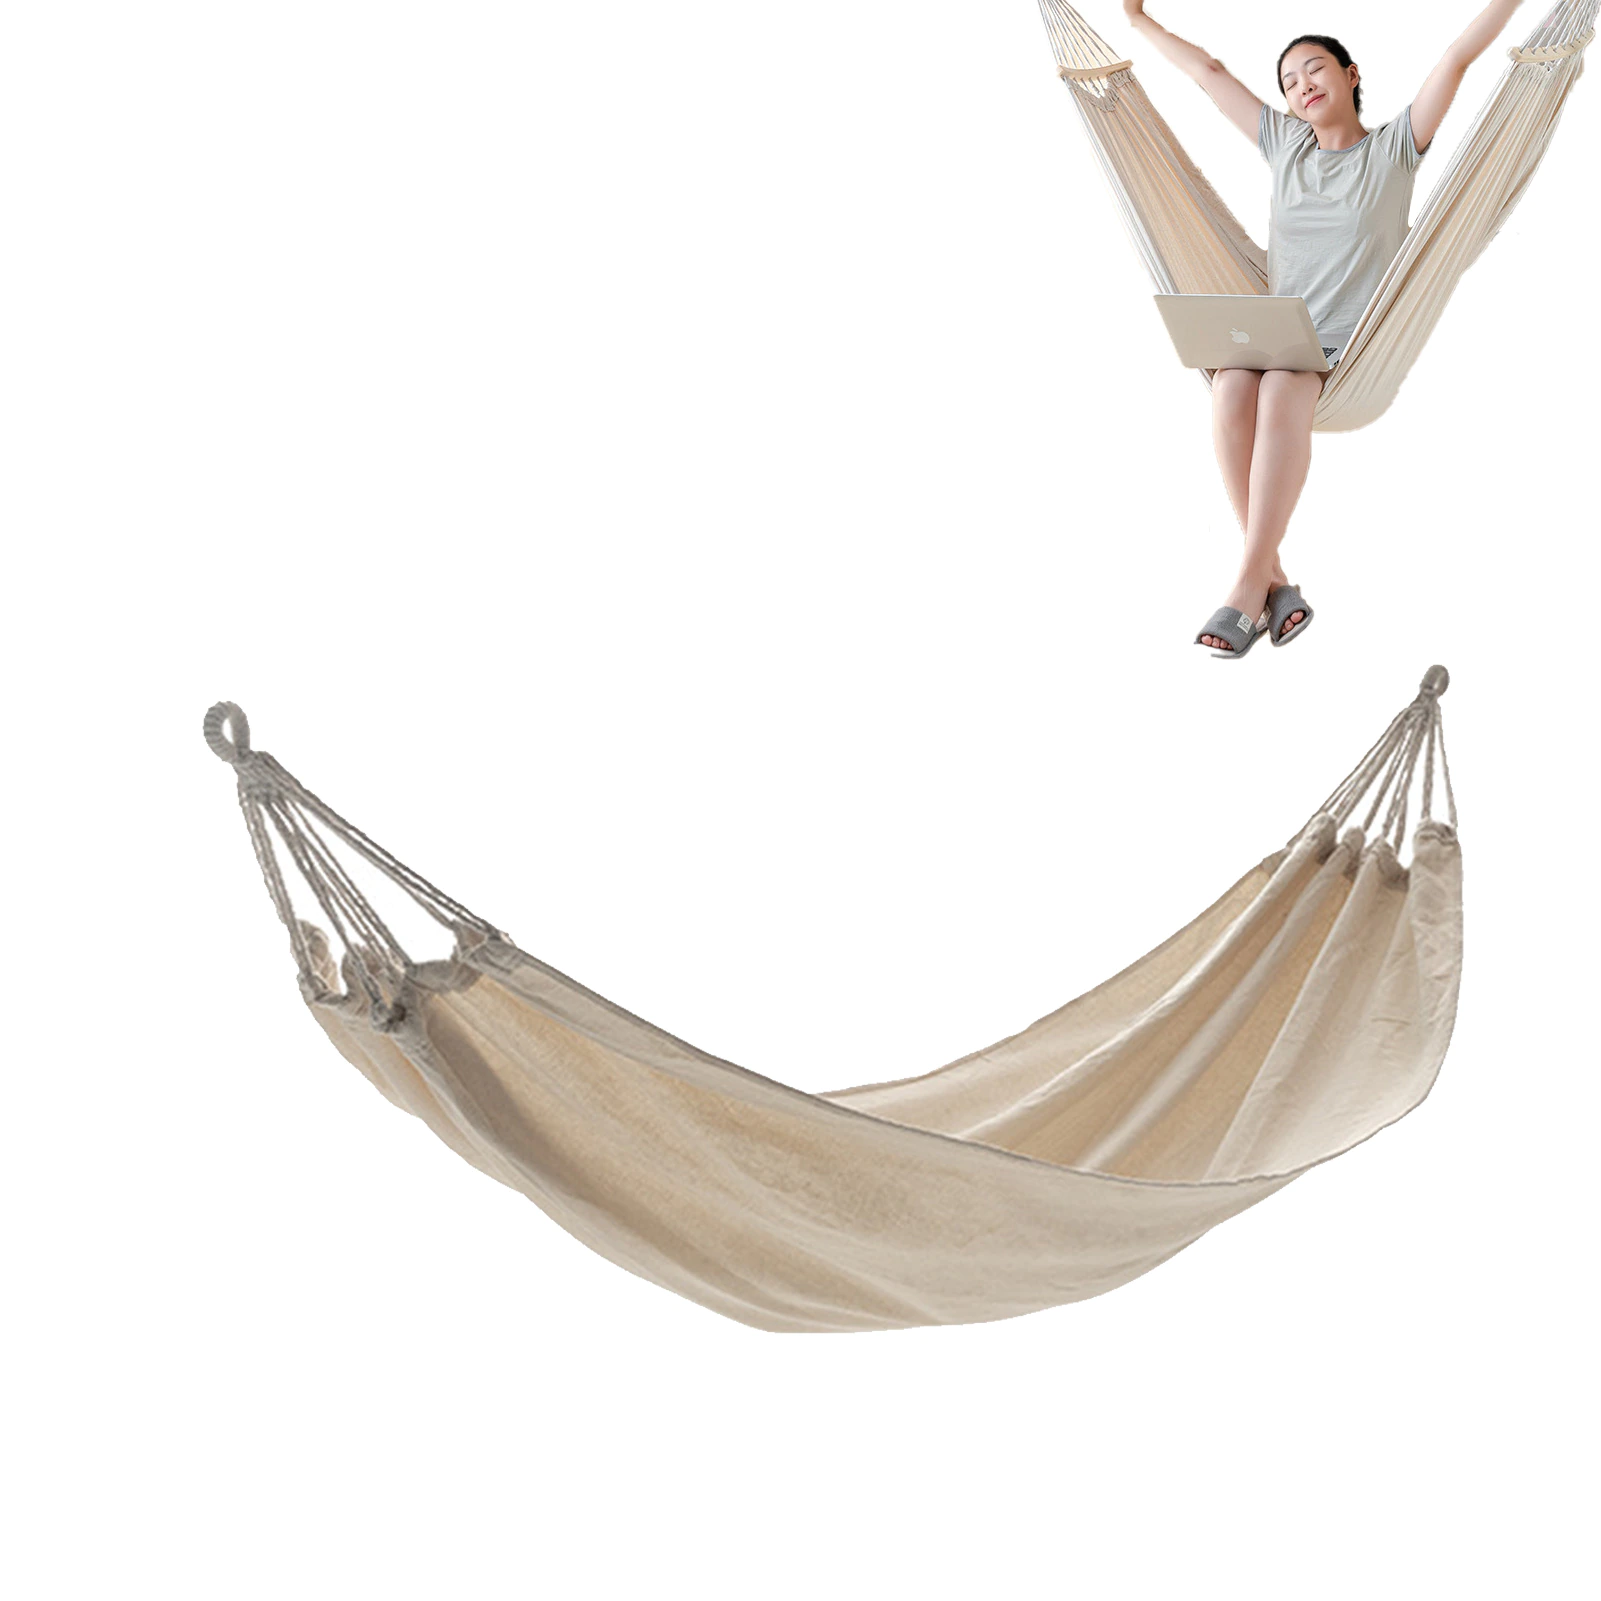 Cheap Goat Tents Camping Hammock Portable Hammock Single Or Double Hammock Hammock With Bags By Backyard Expressions Patio Home Garden Kids   